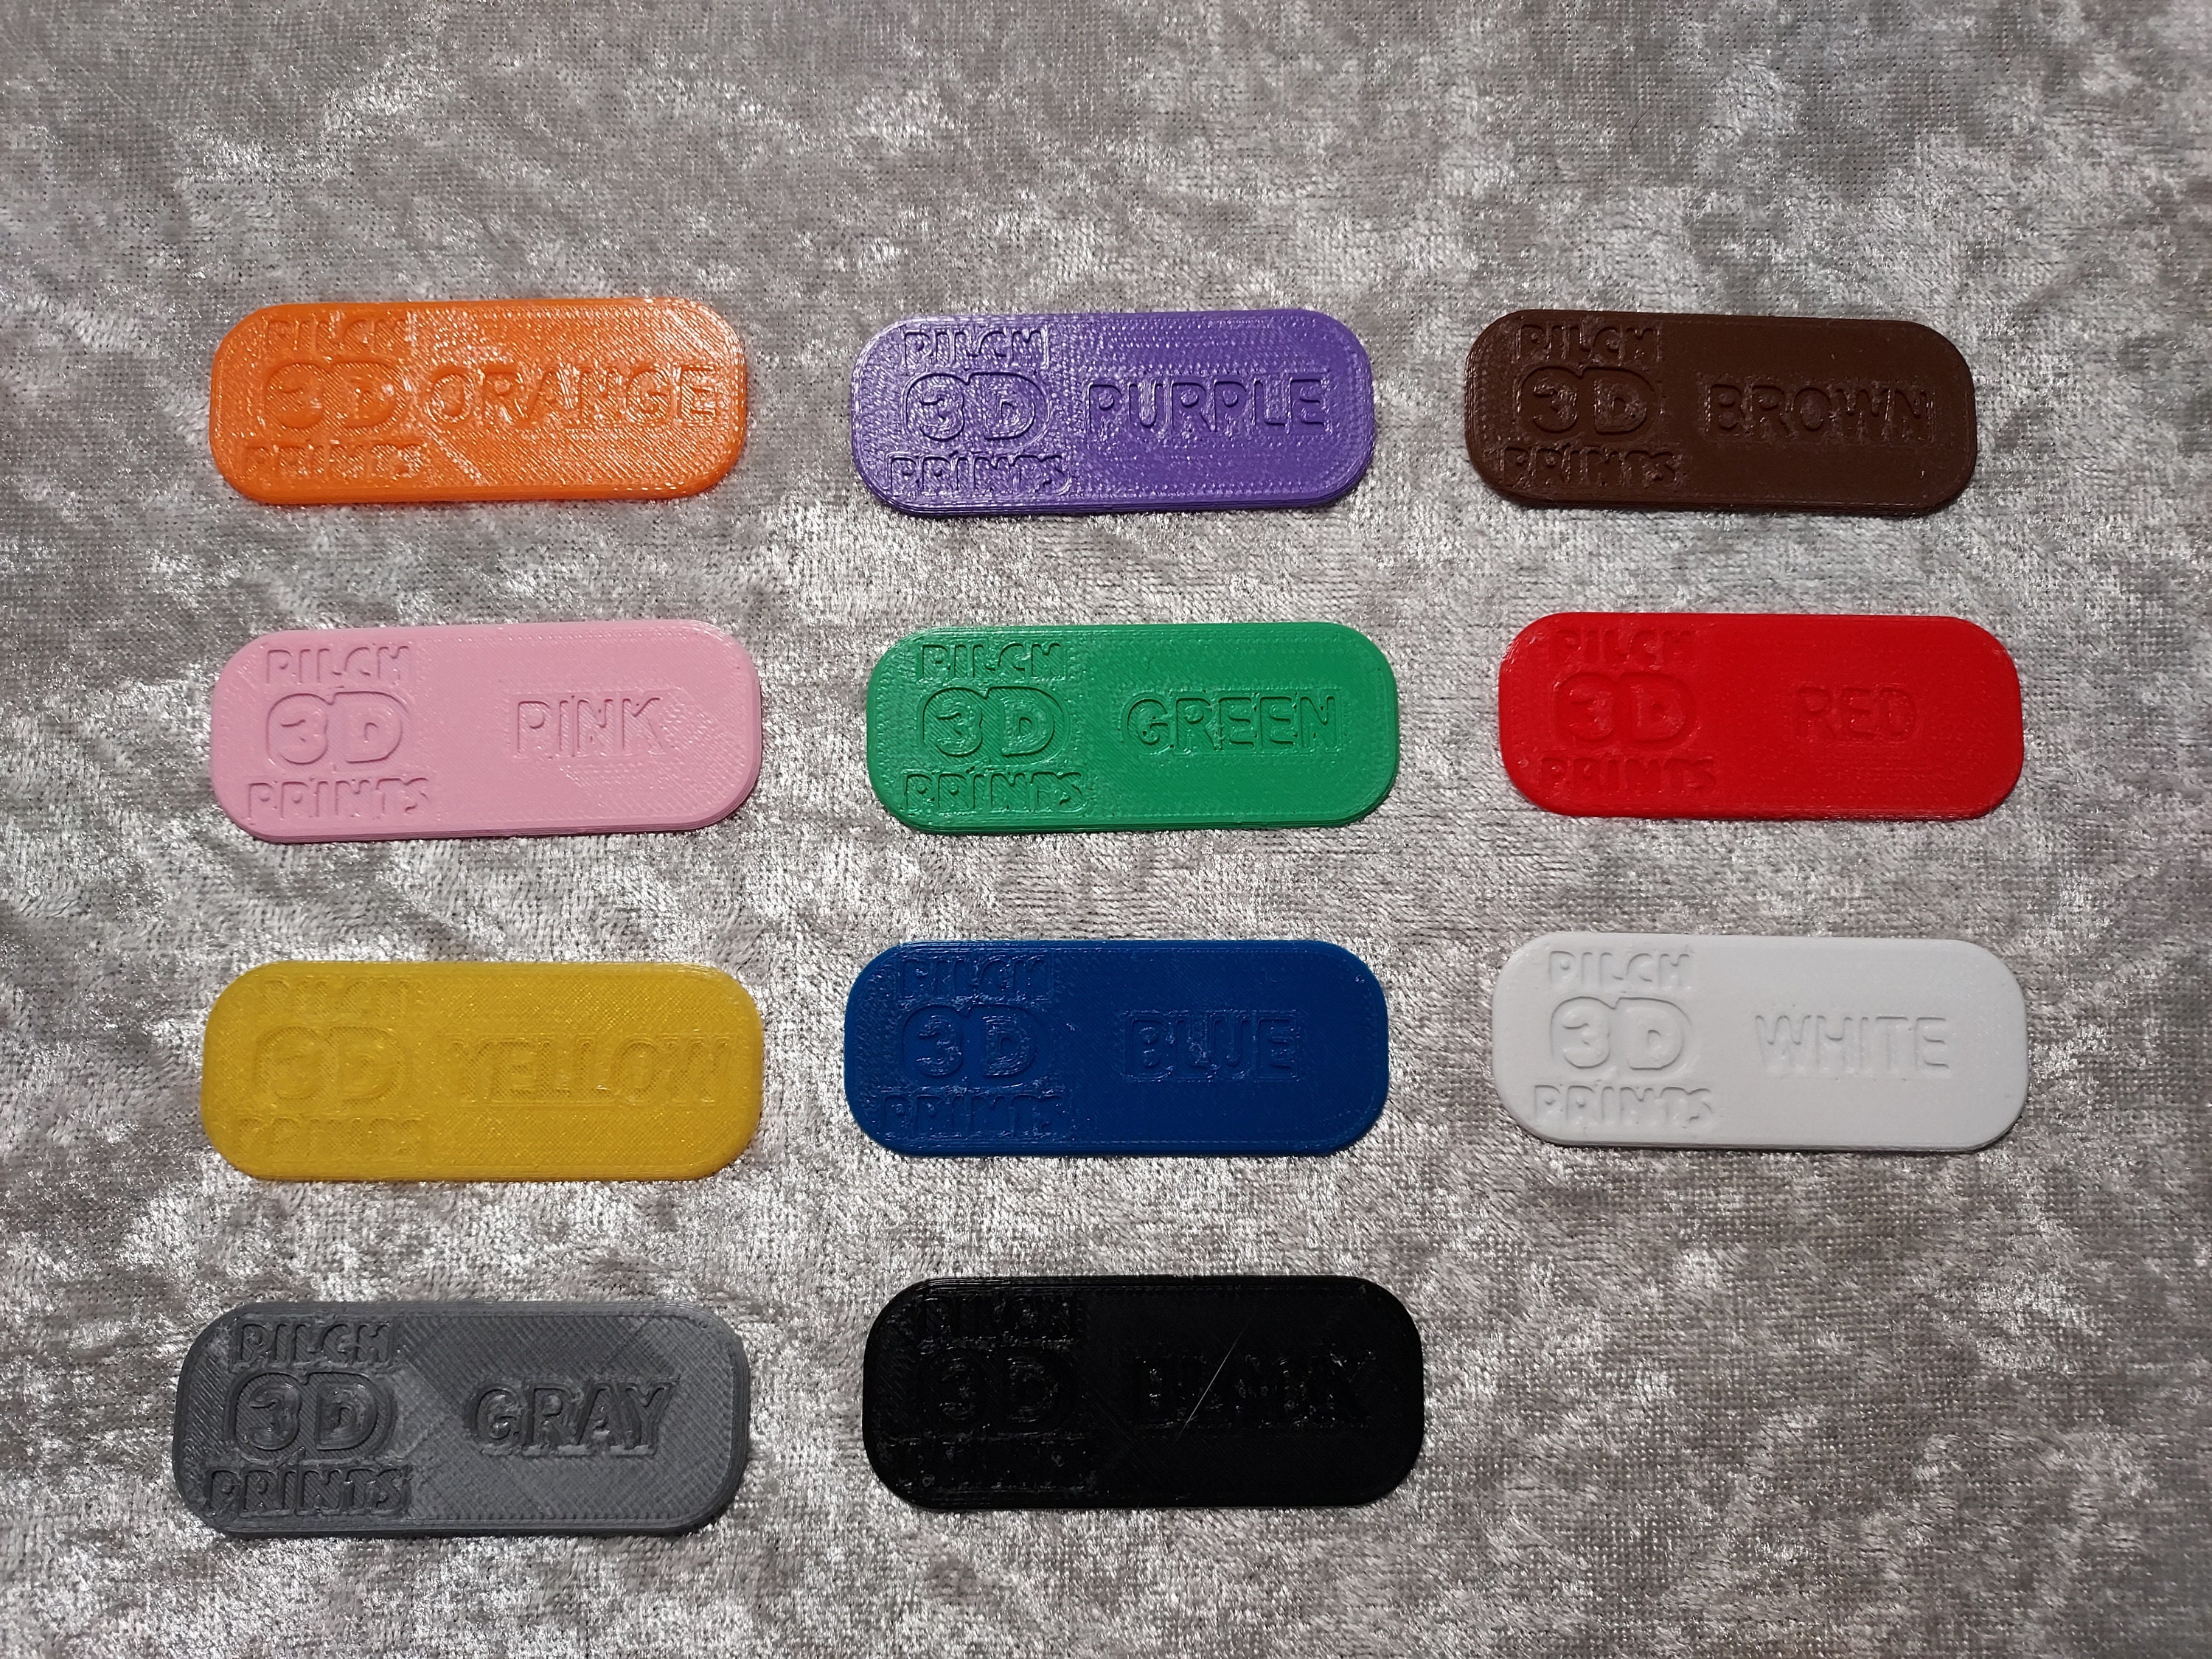 3D Printed Apple AirTag 1-3 Badge Holder custom Options Available